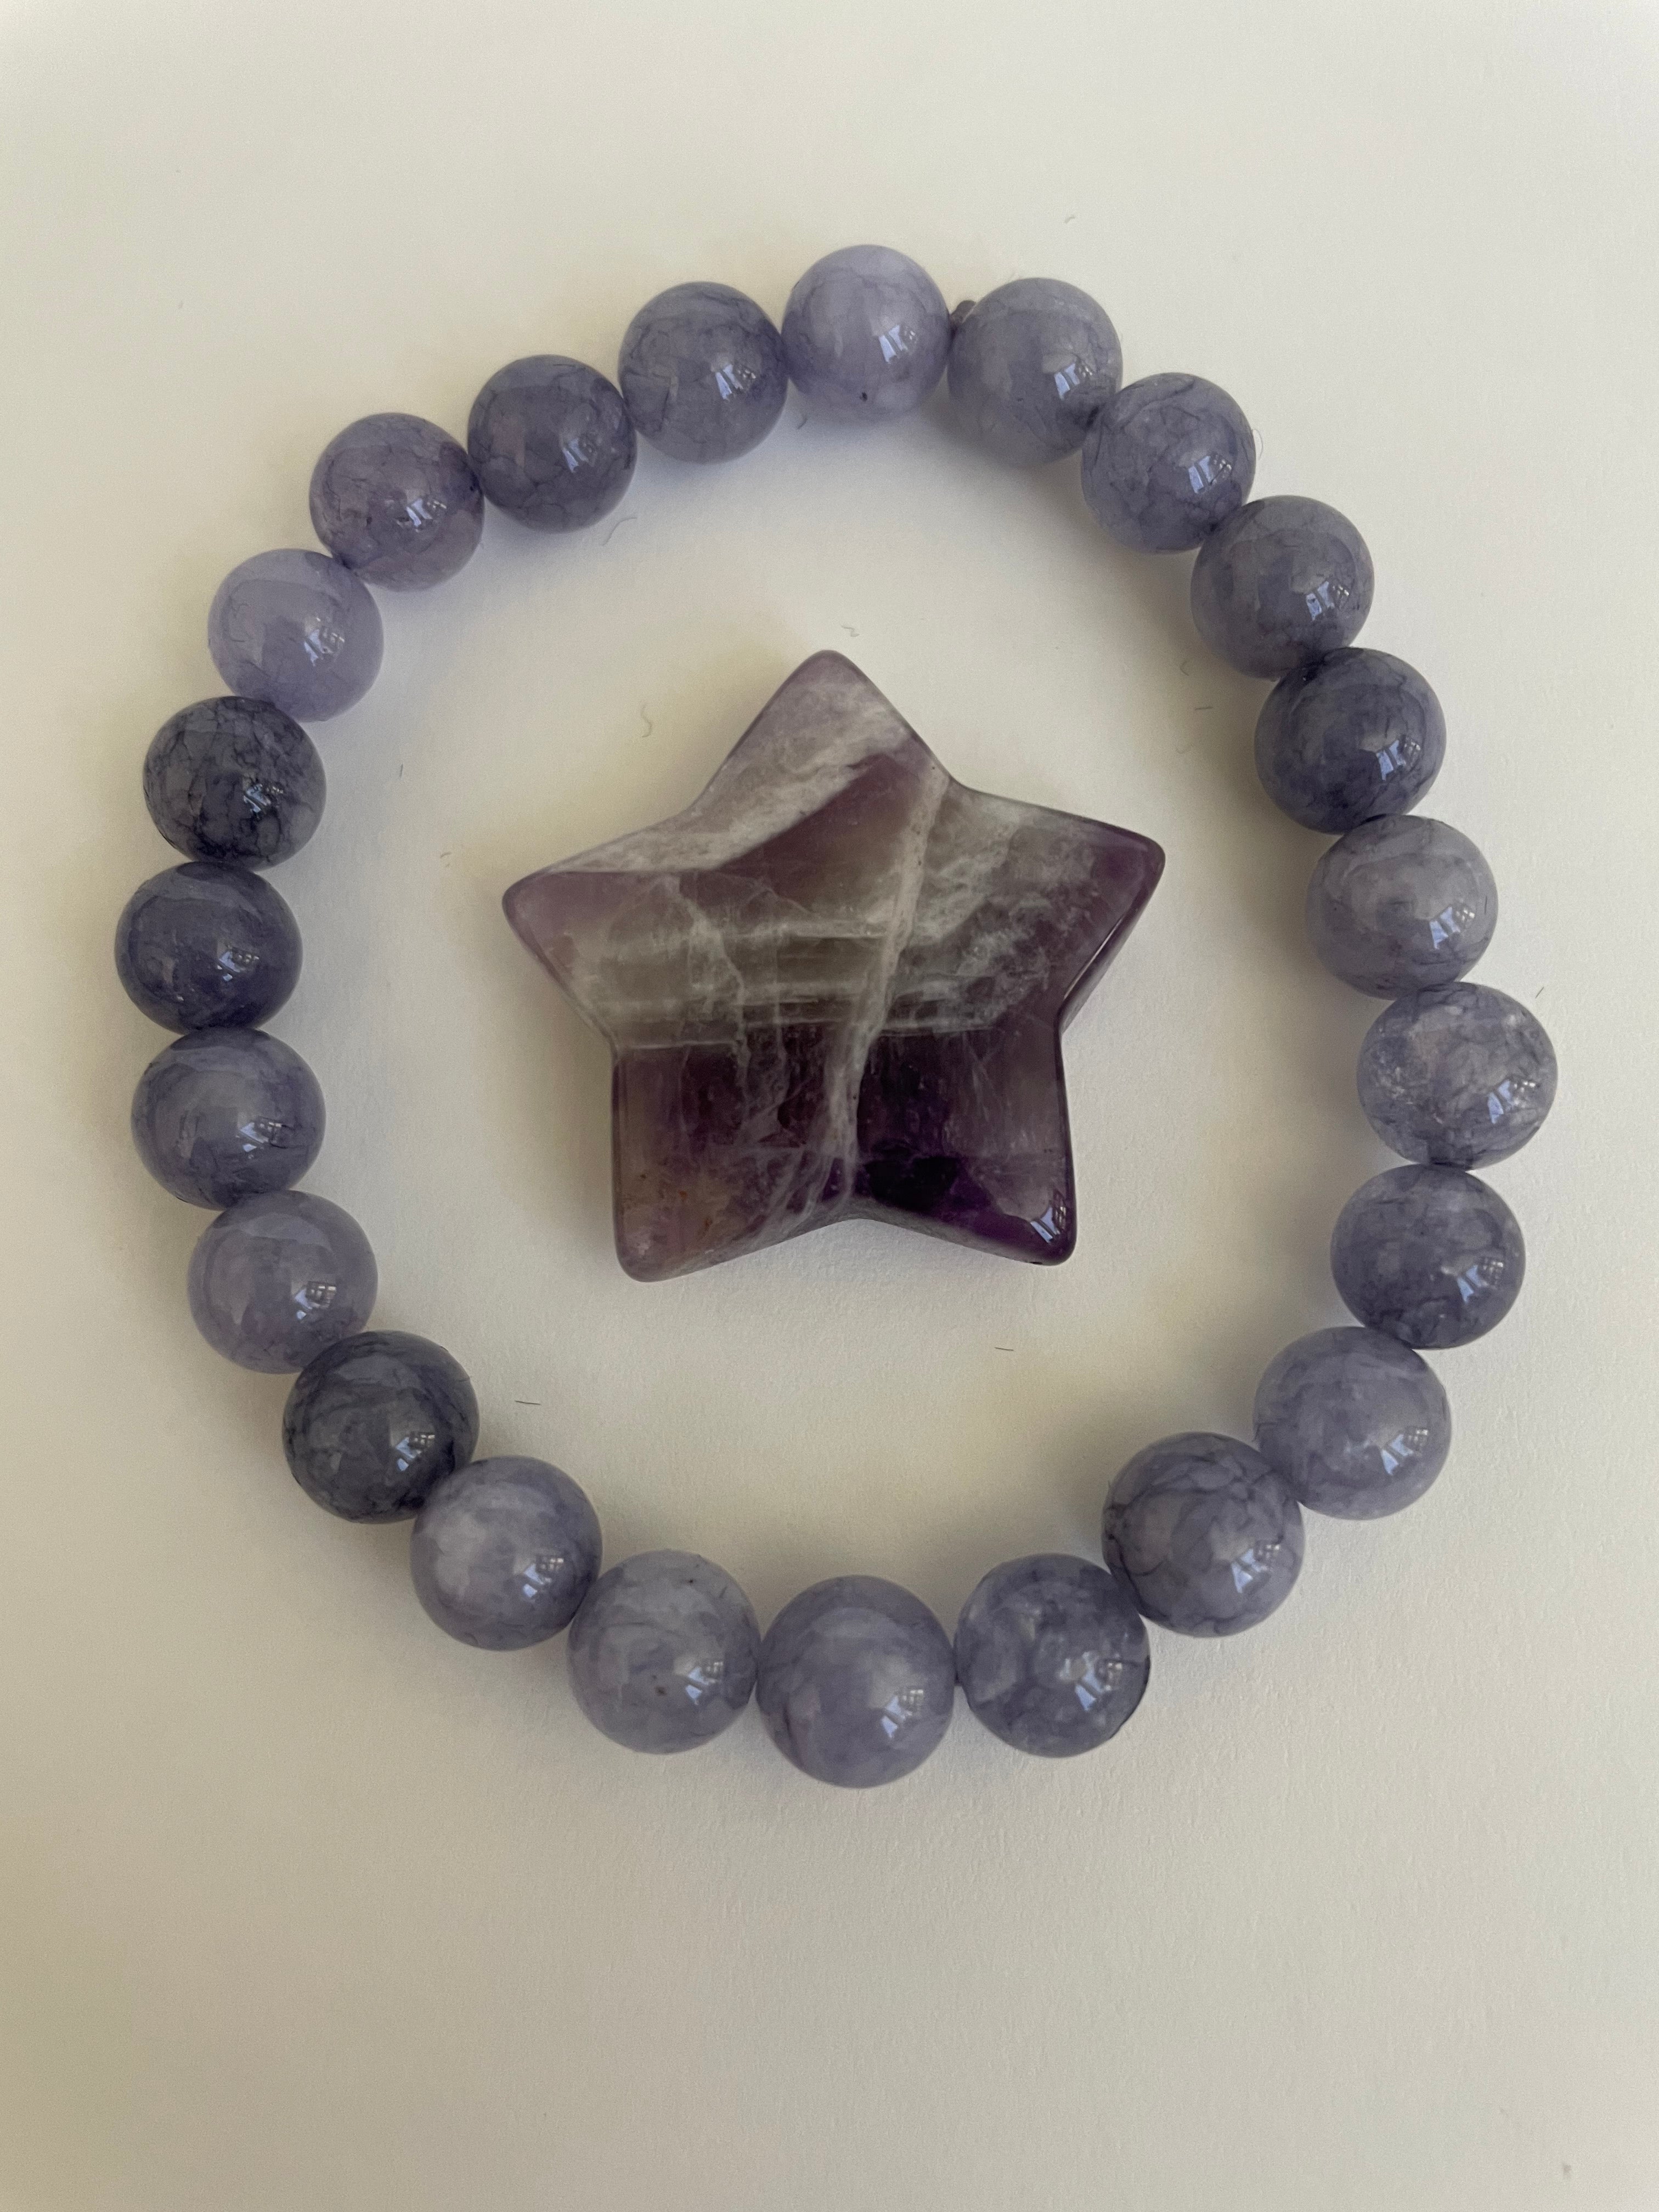 Other side of amethyst star.  It can be used for meditation, healing, for your altar or as décor for any room in your home or office. Easy to slip right into your pocket so you have the energy of amethyst everywhere you go! Approximately 1¼". Cost is $6. 